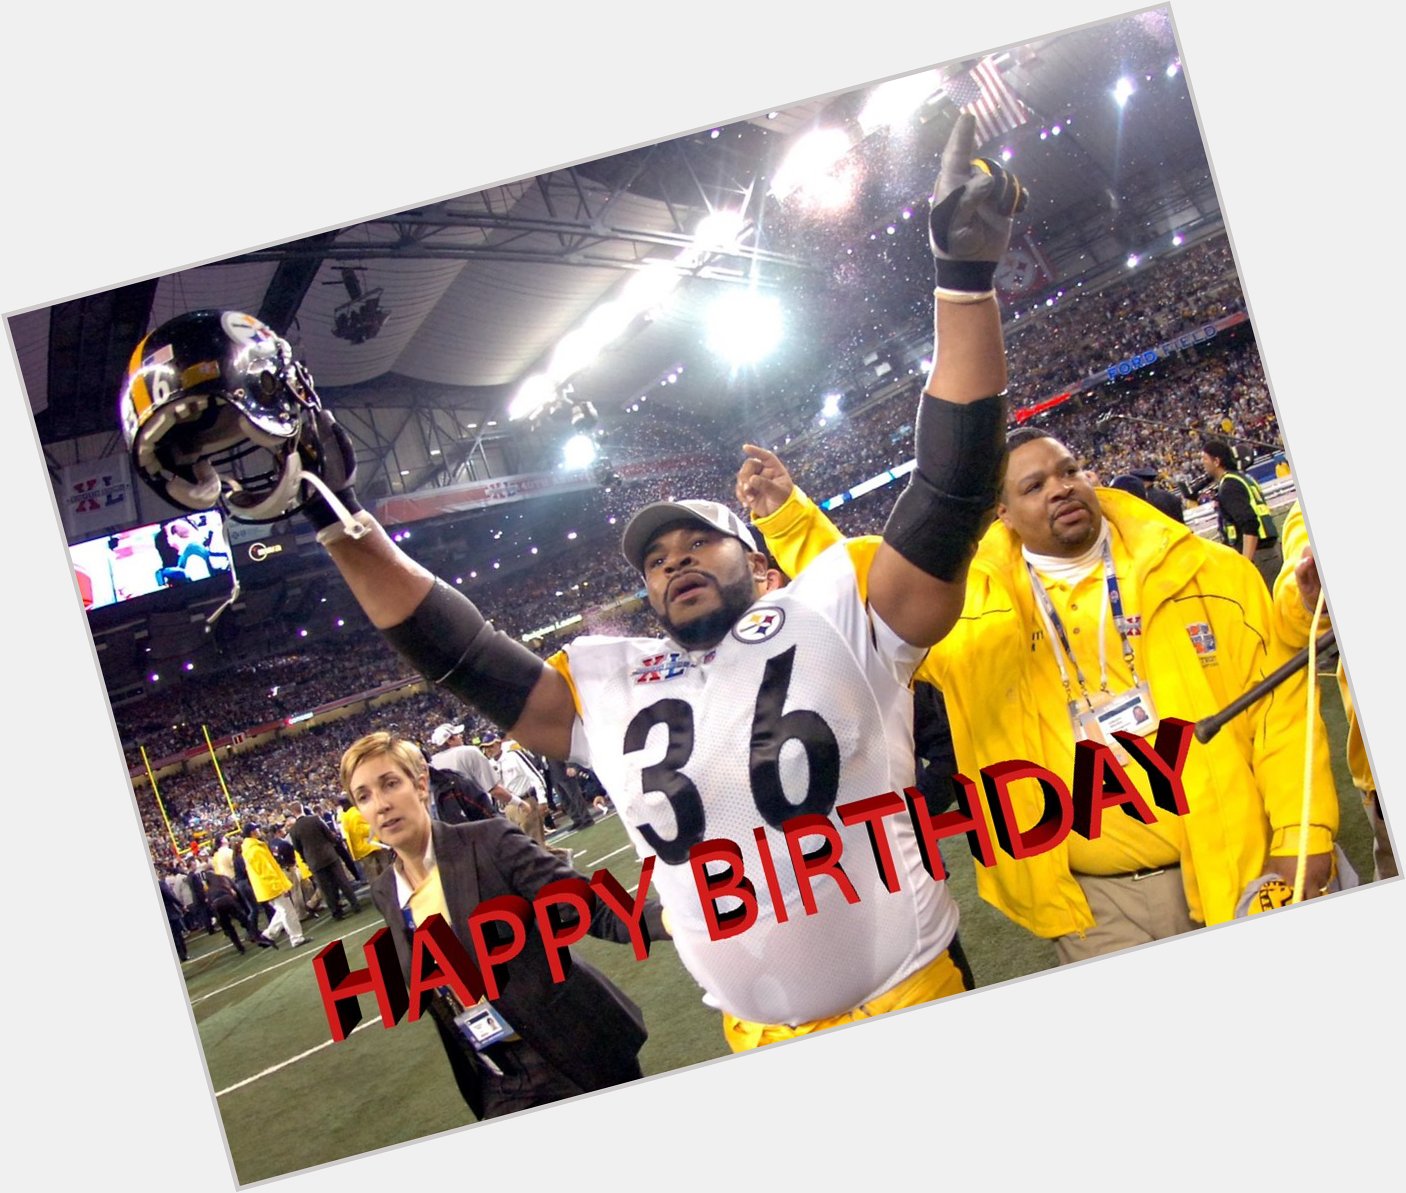 APSE would like to wish Hall of Fame running back, Jerome Bettis, a very Happy Birthday!!  